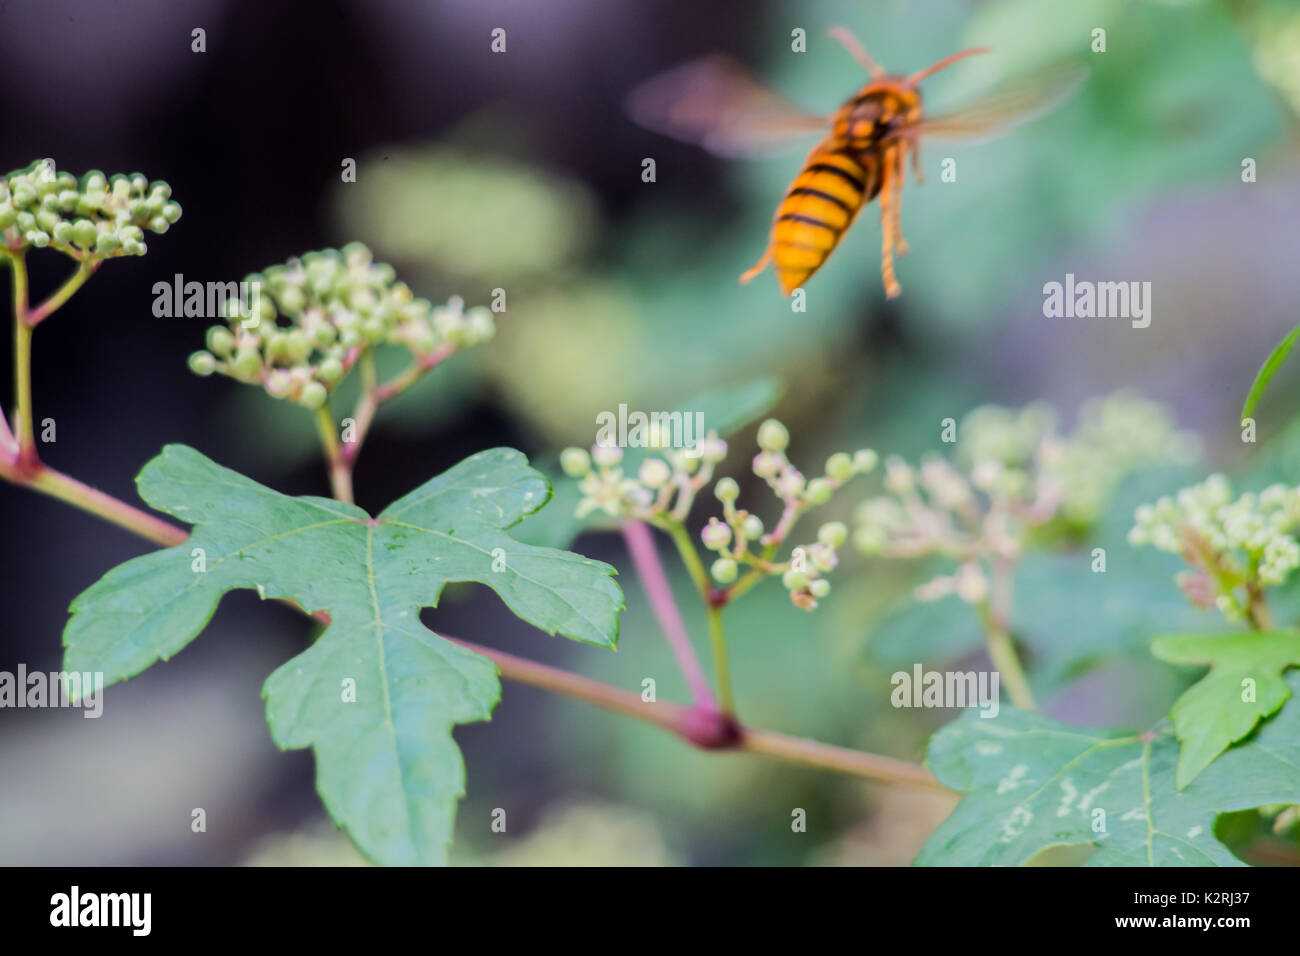 A hornet flies away from the camera after resting on a leaf. Stock Photo